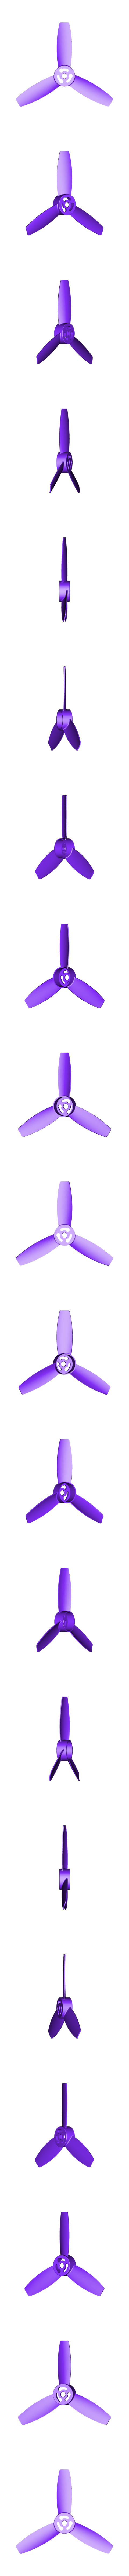 Propeller_without_hole.stl Download free STL file Replacement propellers for the Parrot Bebop • 3D print model, nowprint3d